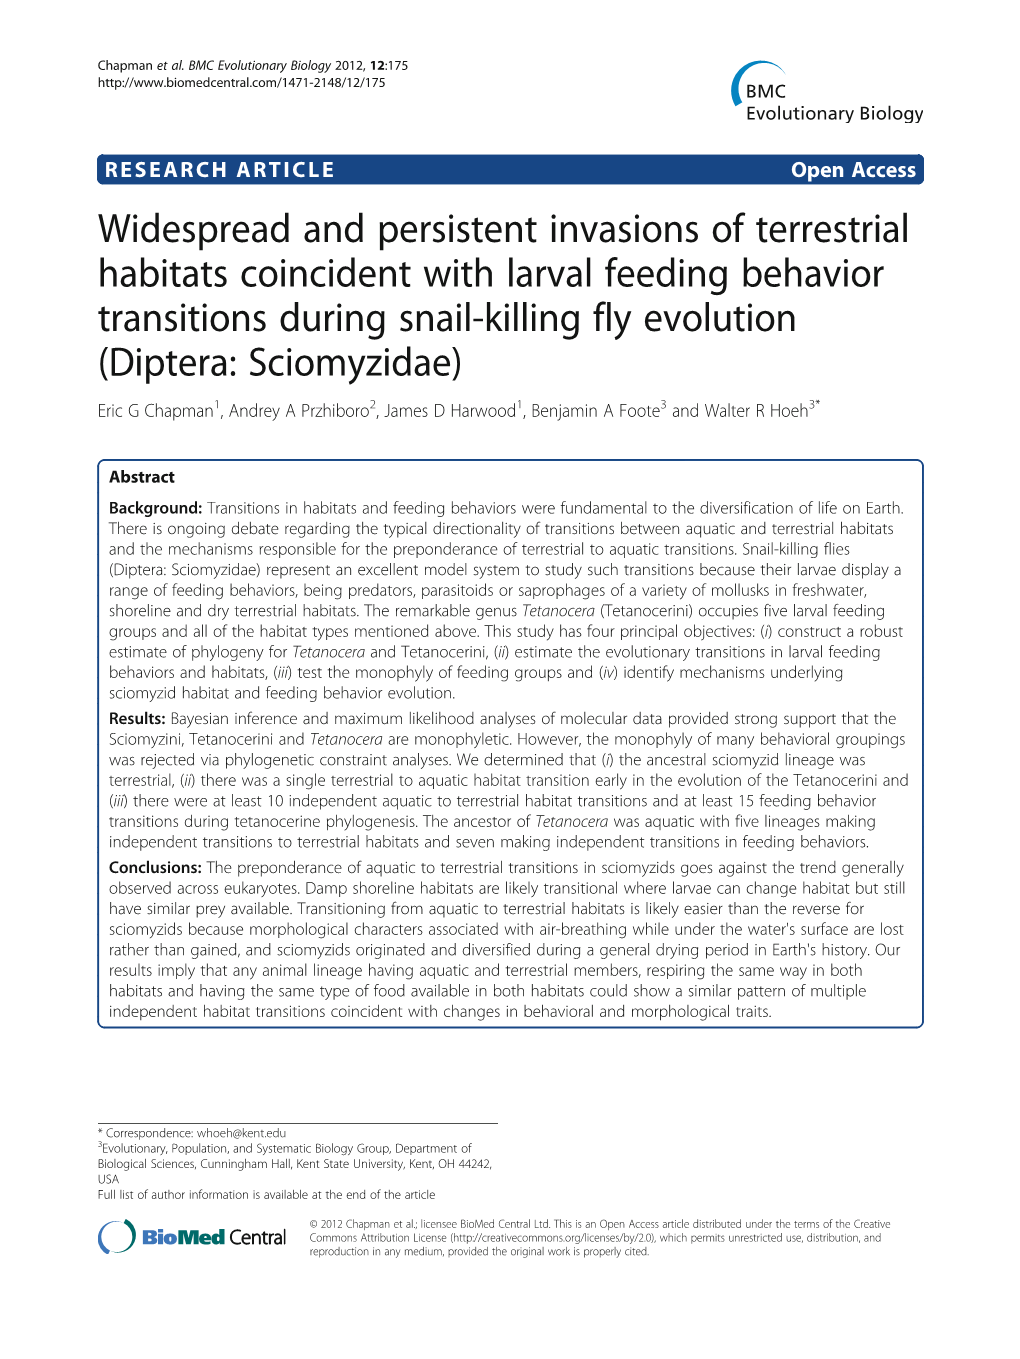 Widespread and Persistent Invasions of Terrestrial